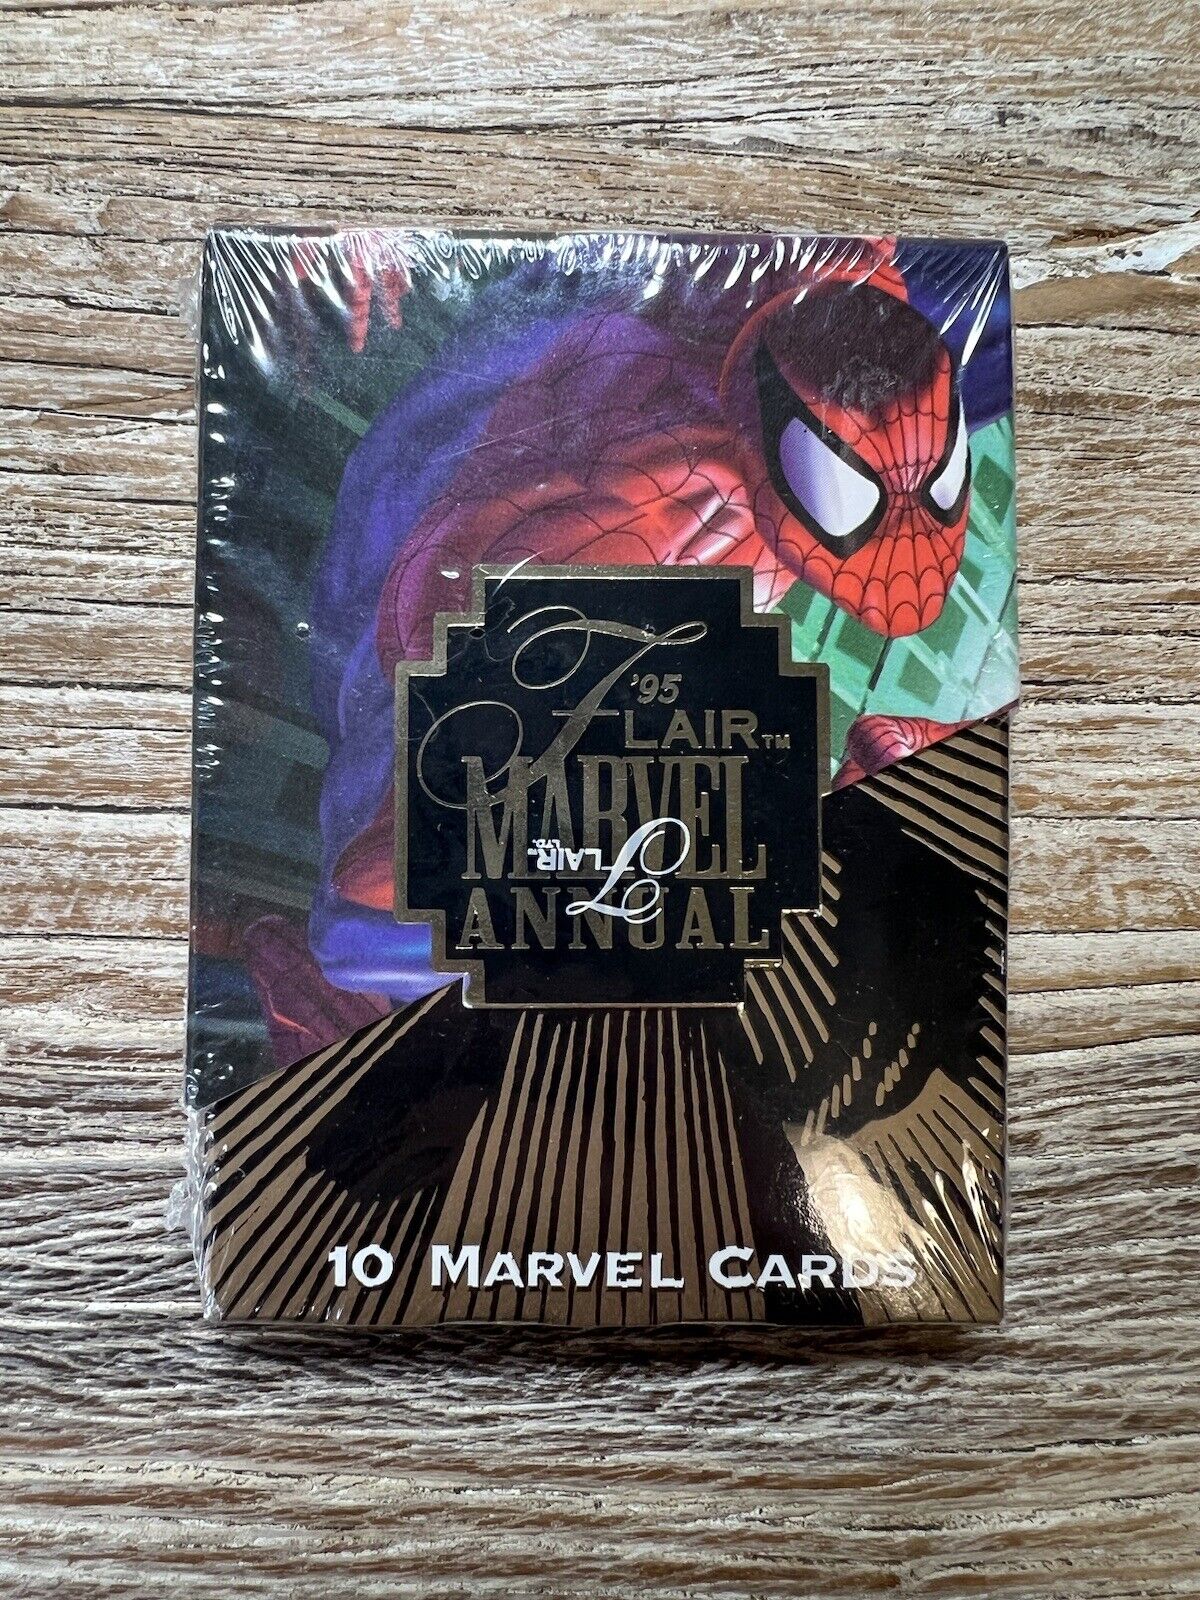 Sealed 1995 Flair Marvel Annual Hobby Pack - Includes 10 Cards - Spiderman Cover